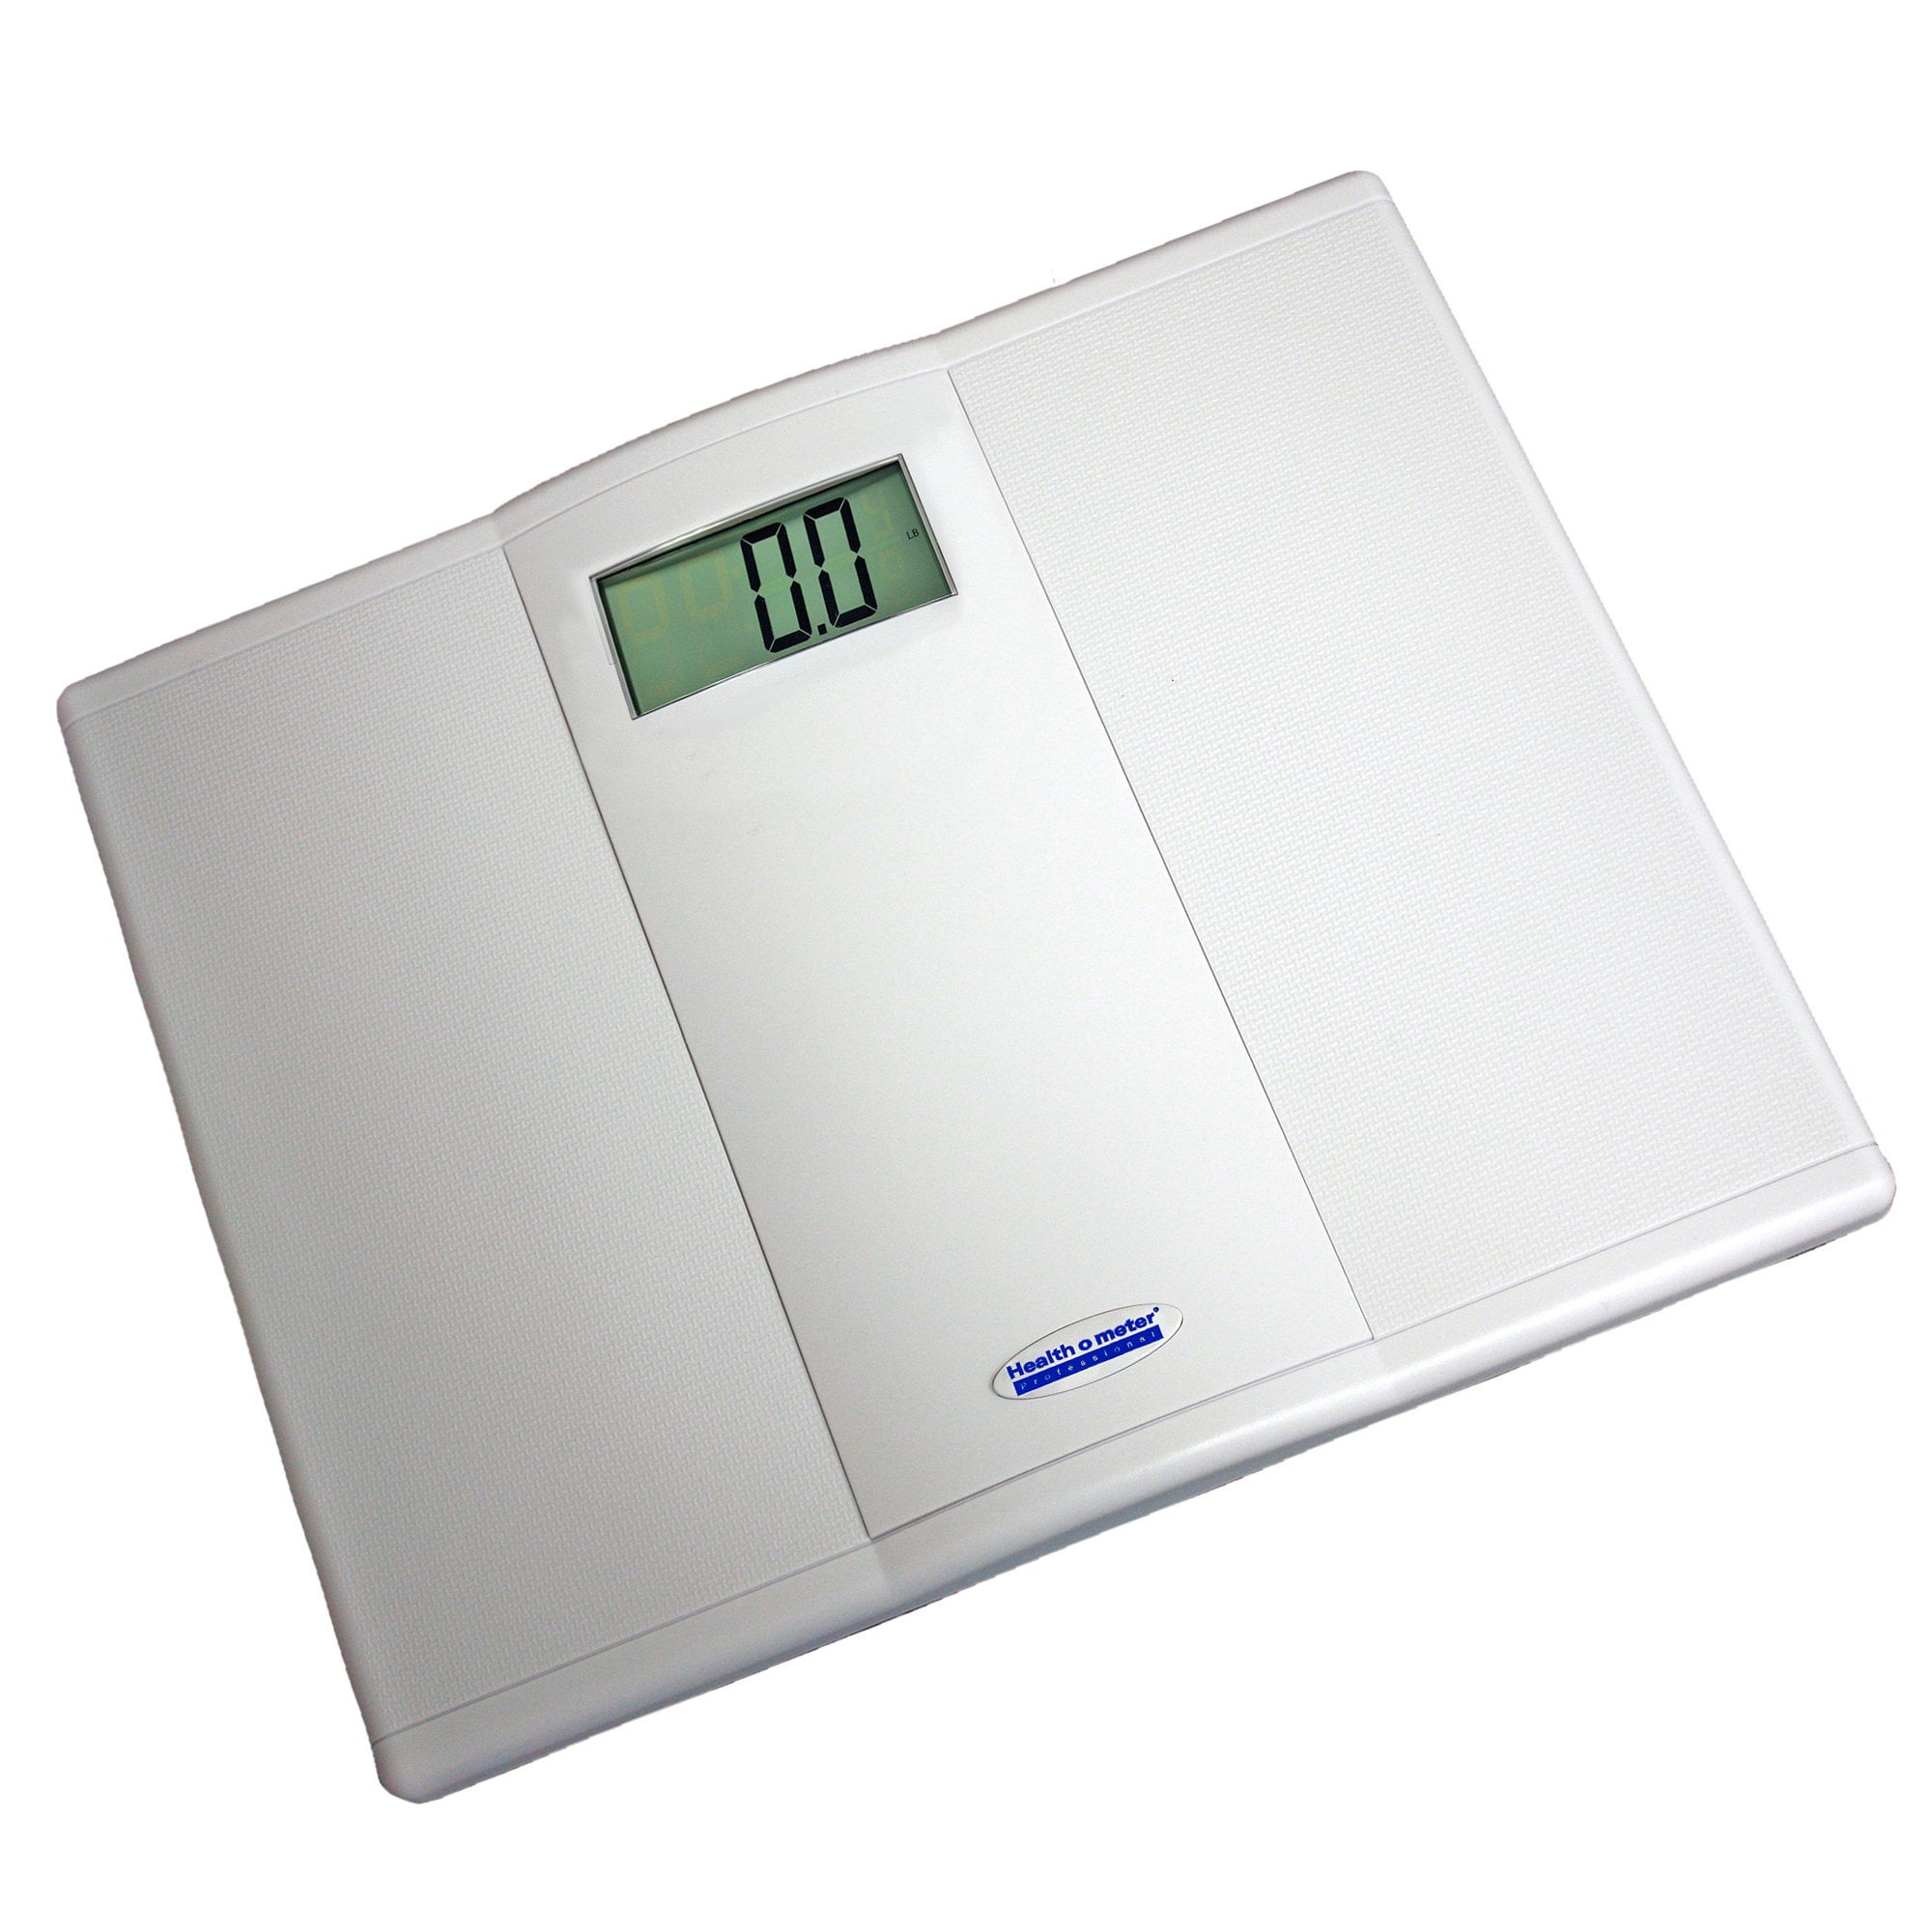  RunSTAR 550lb Bathroom Digital Scale for Body Weight with  Ultra-Wide Platform and Large LCD Display, Accurate High Precision Scale  with Extra-High Capacity, FSA HSA Eligible : Health & Household